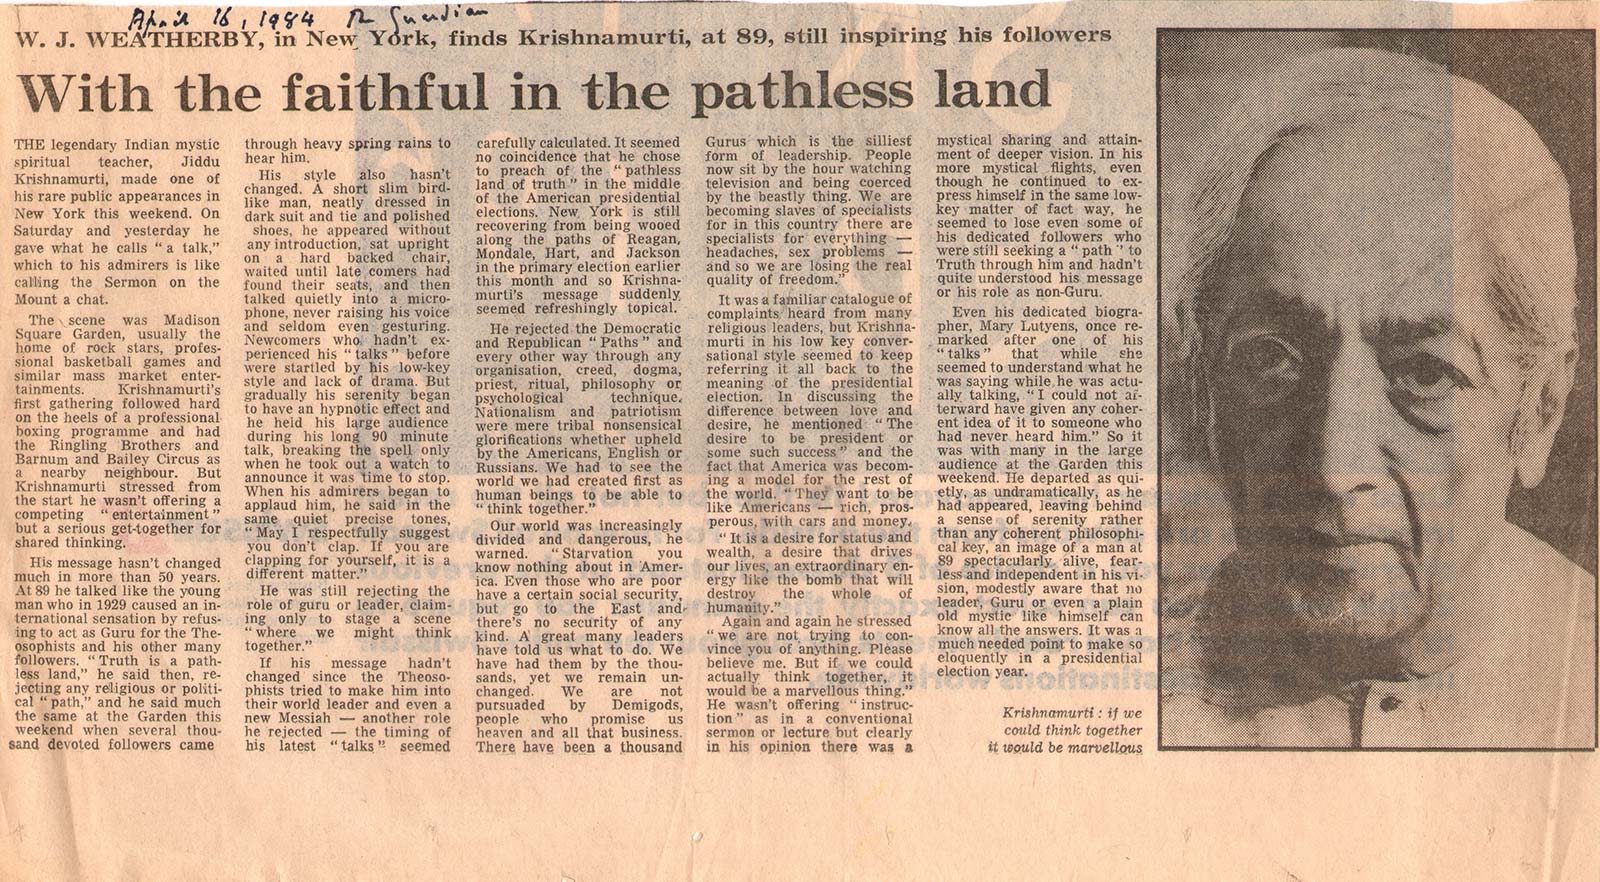 1984 The Guardian - With the faithful in the pathless land